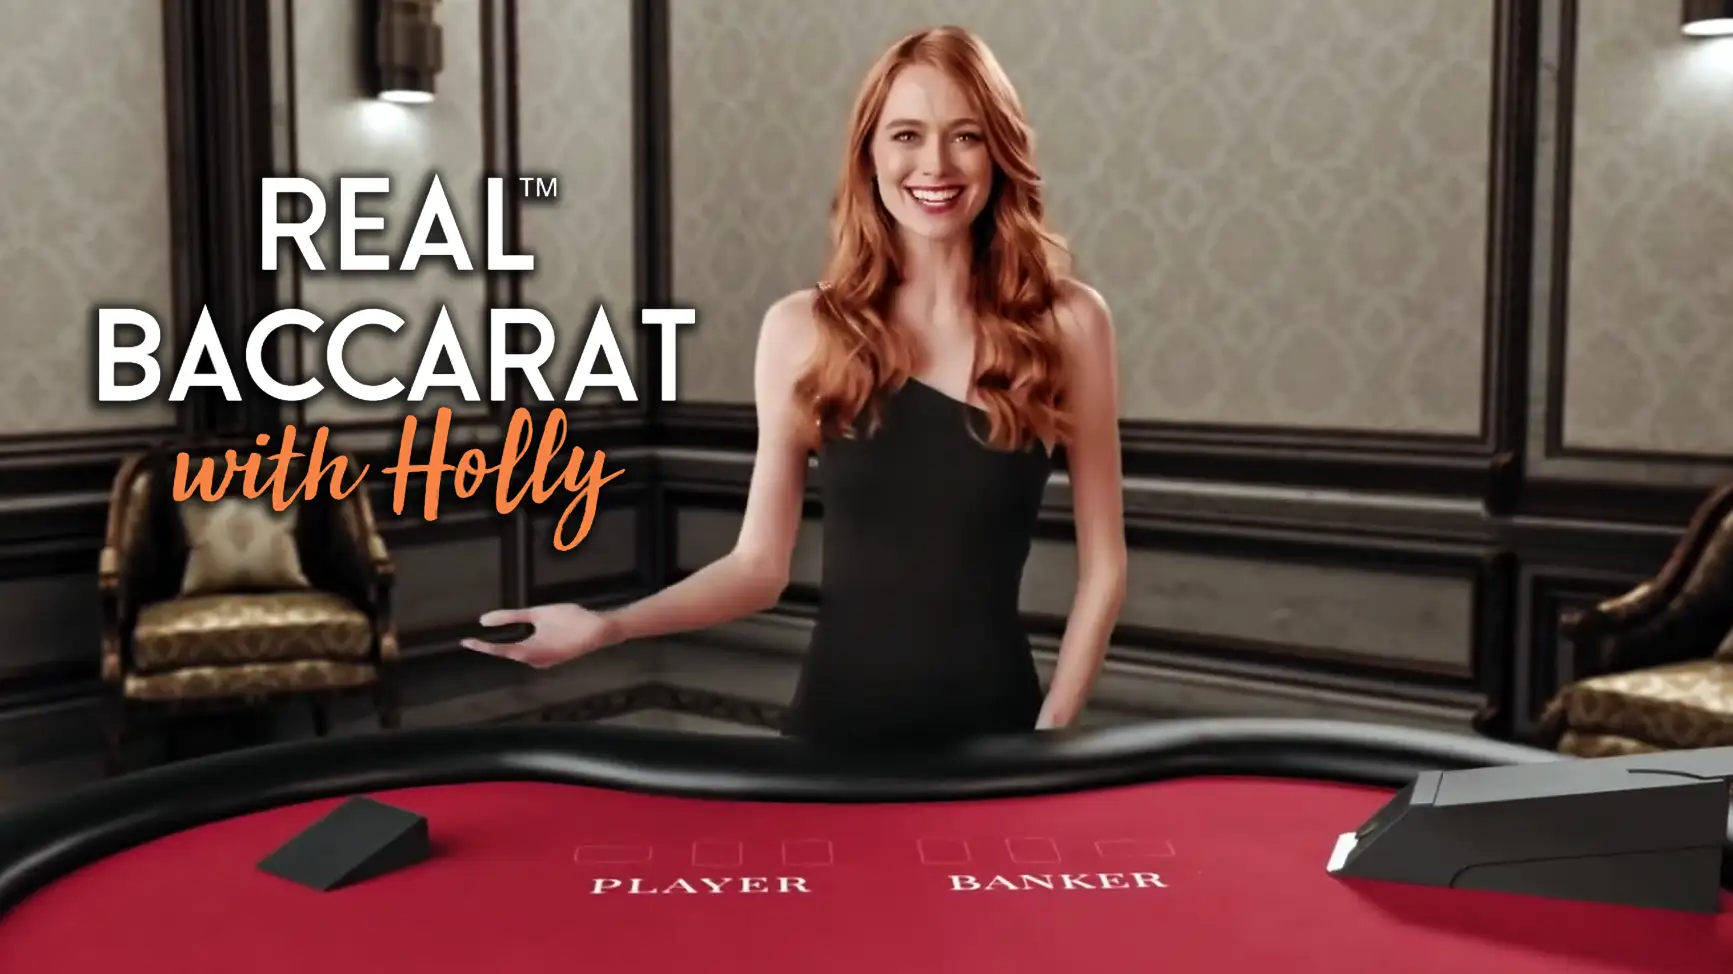 Real Baccarat with Holly demo play